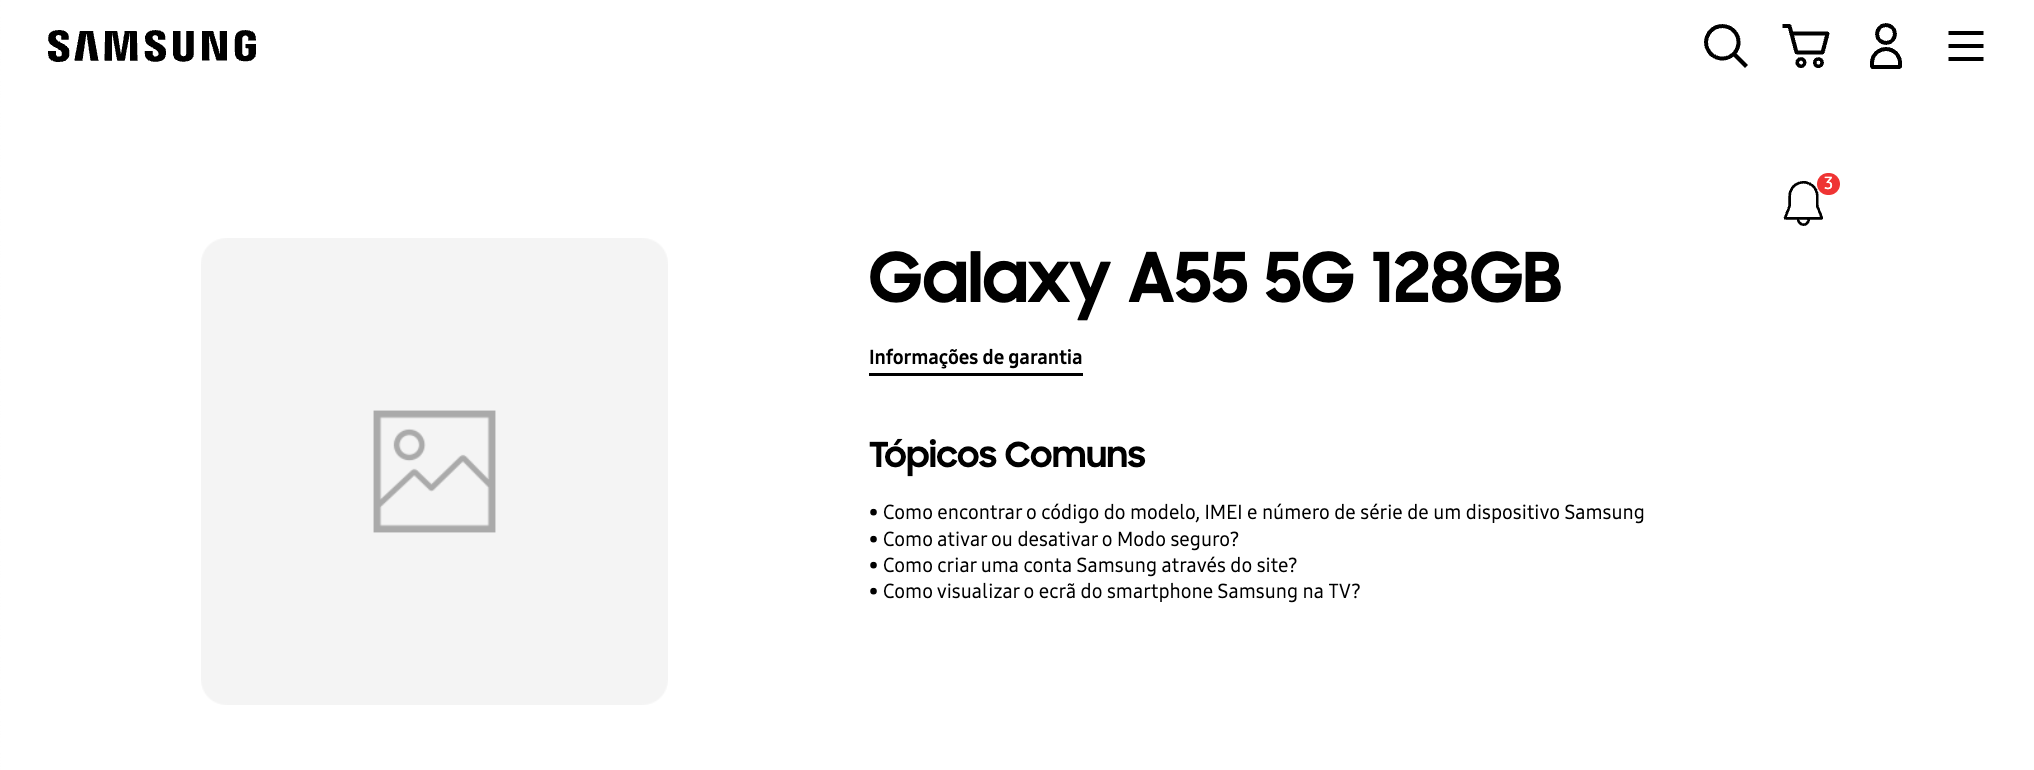 Galaxy A55: Design and Expected Features